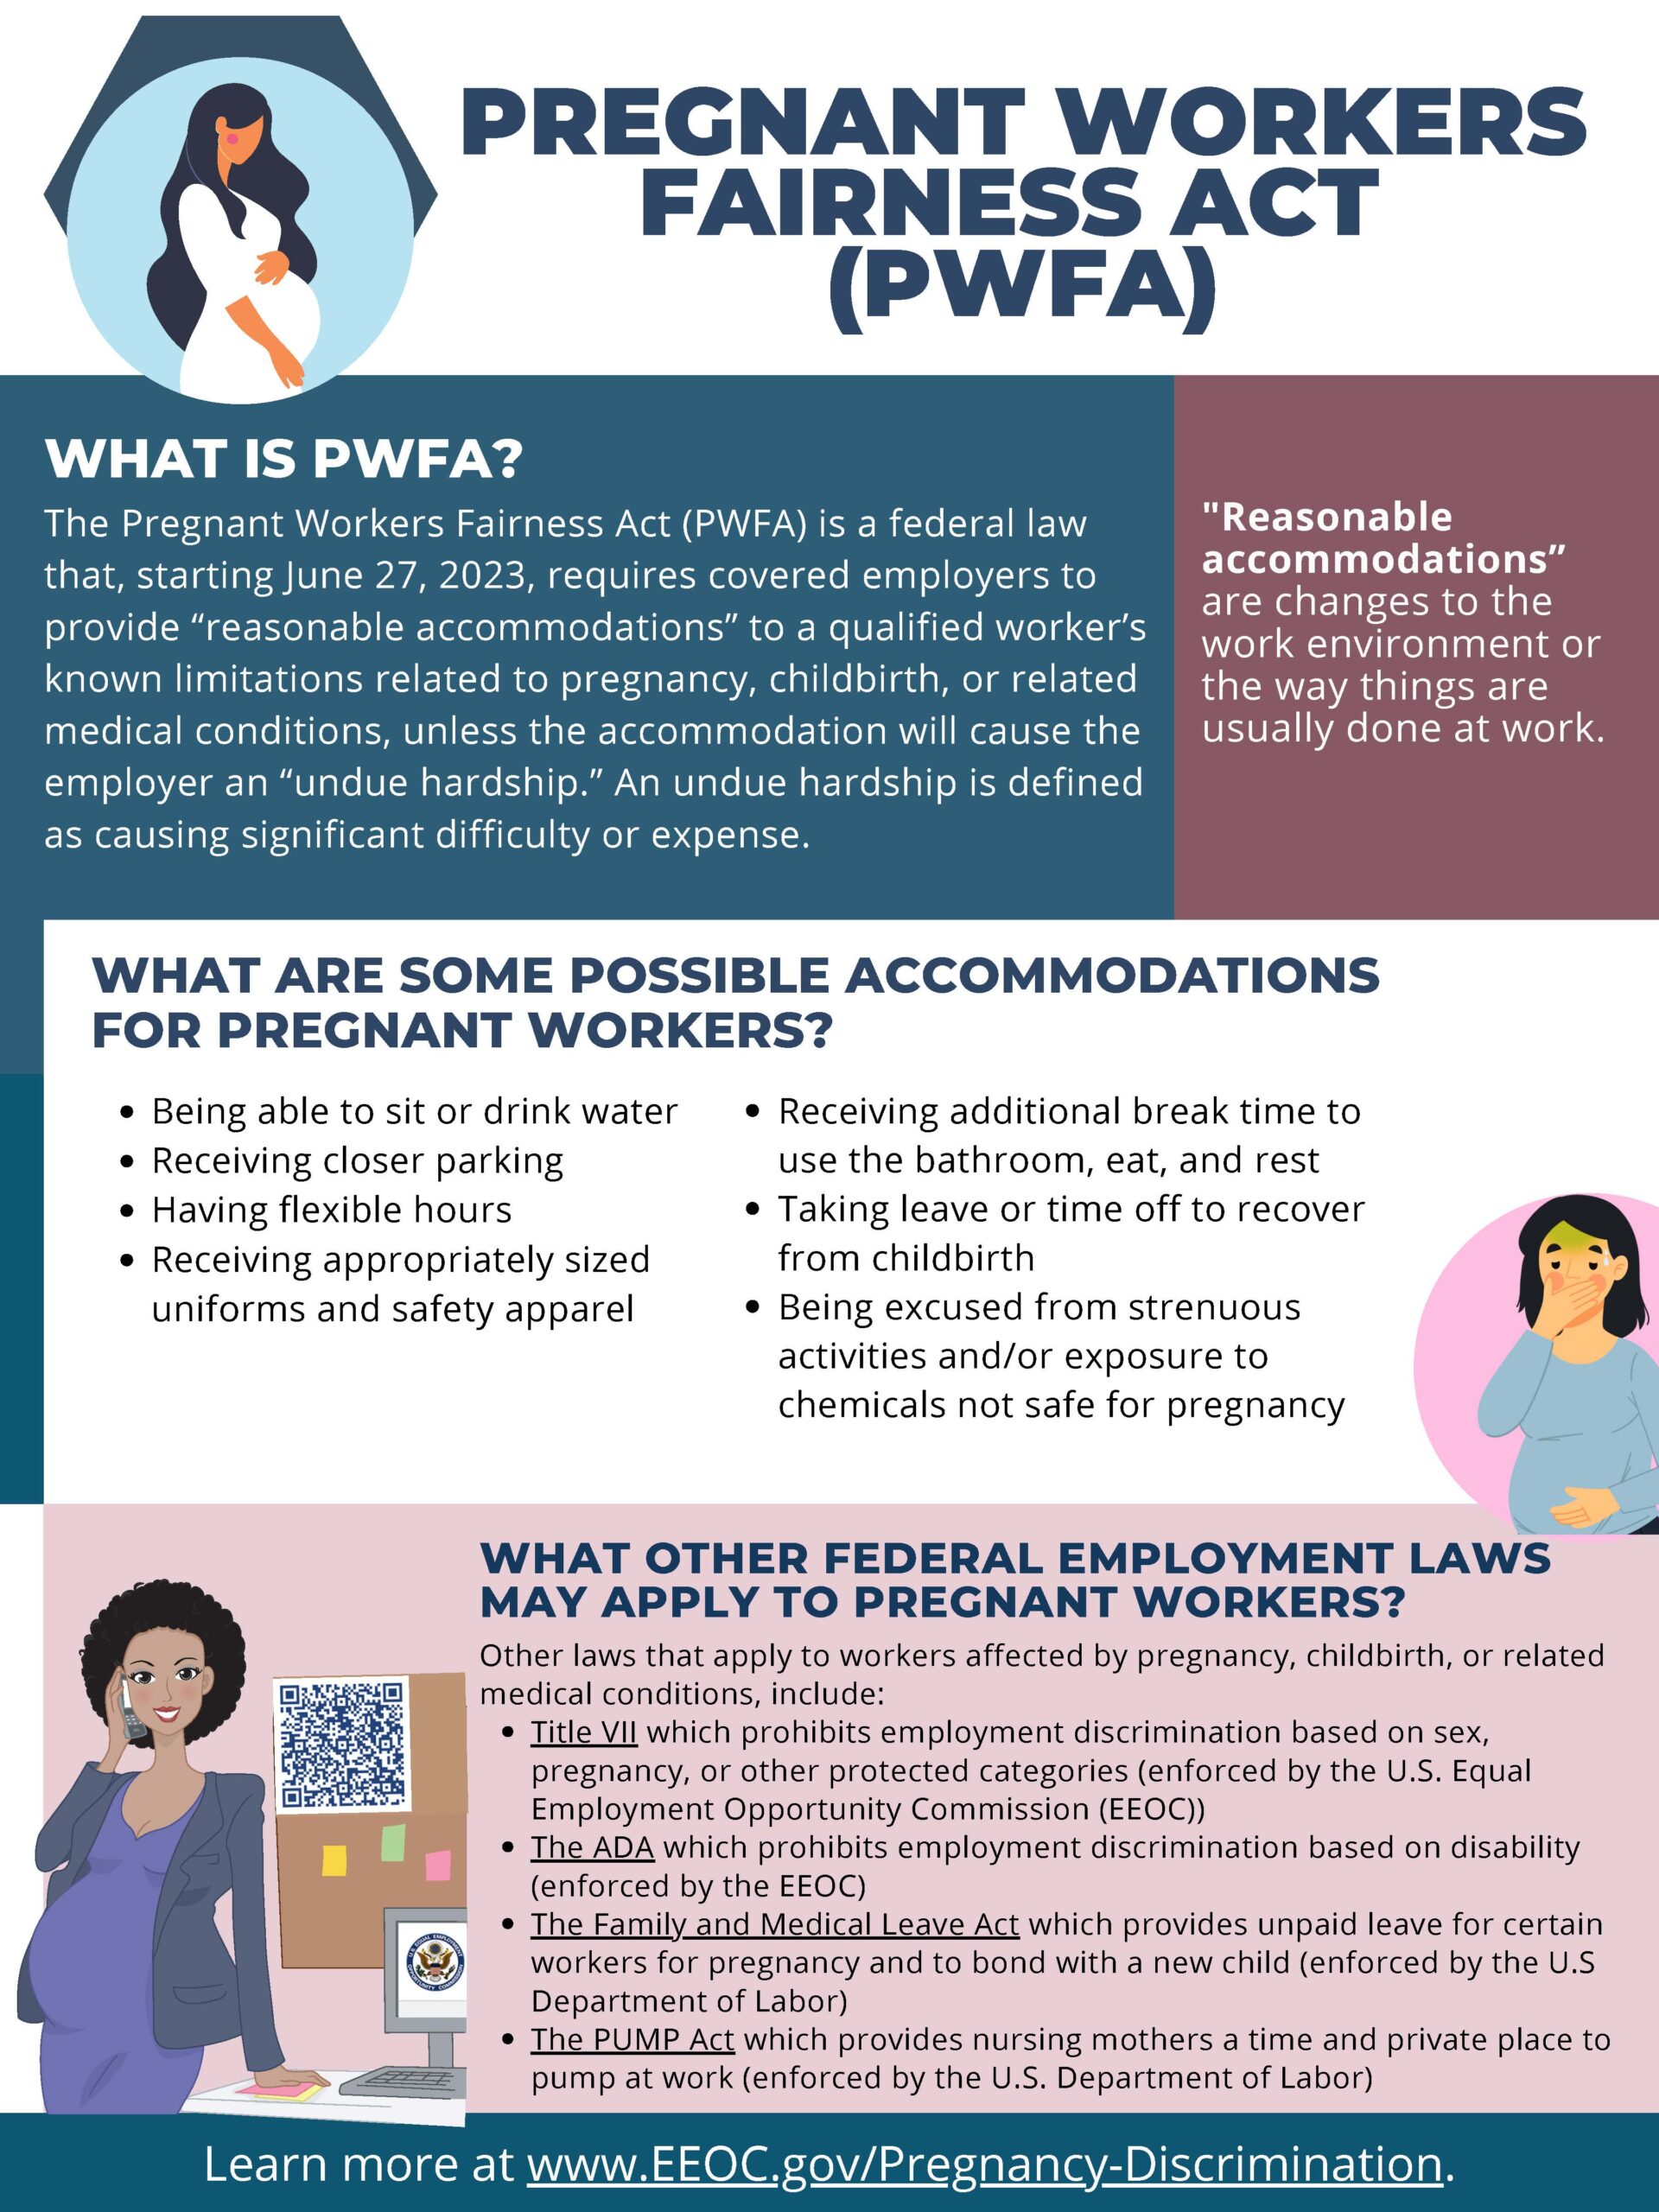 Are you expecting? You should know how the new PWFA affects you!